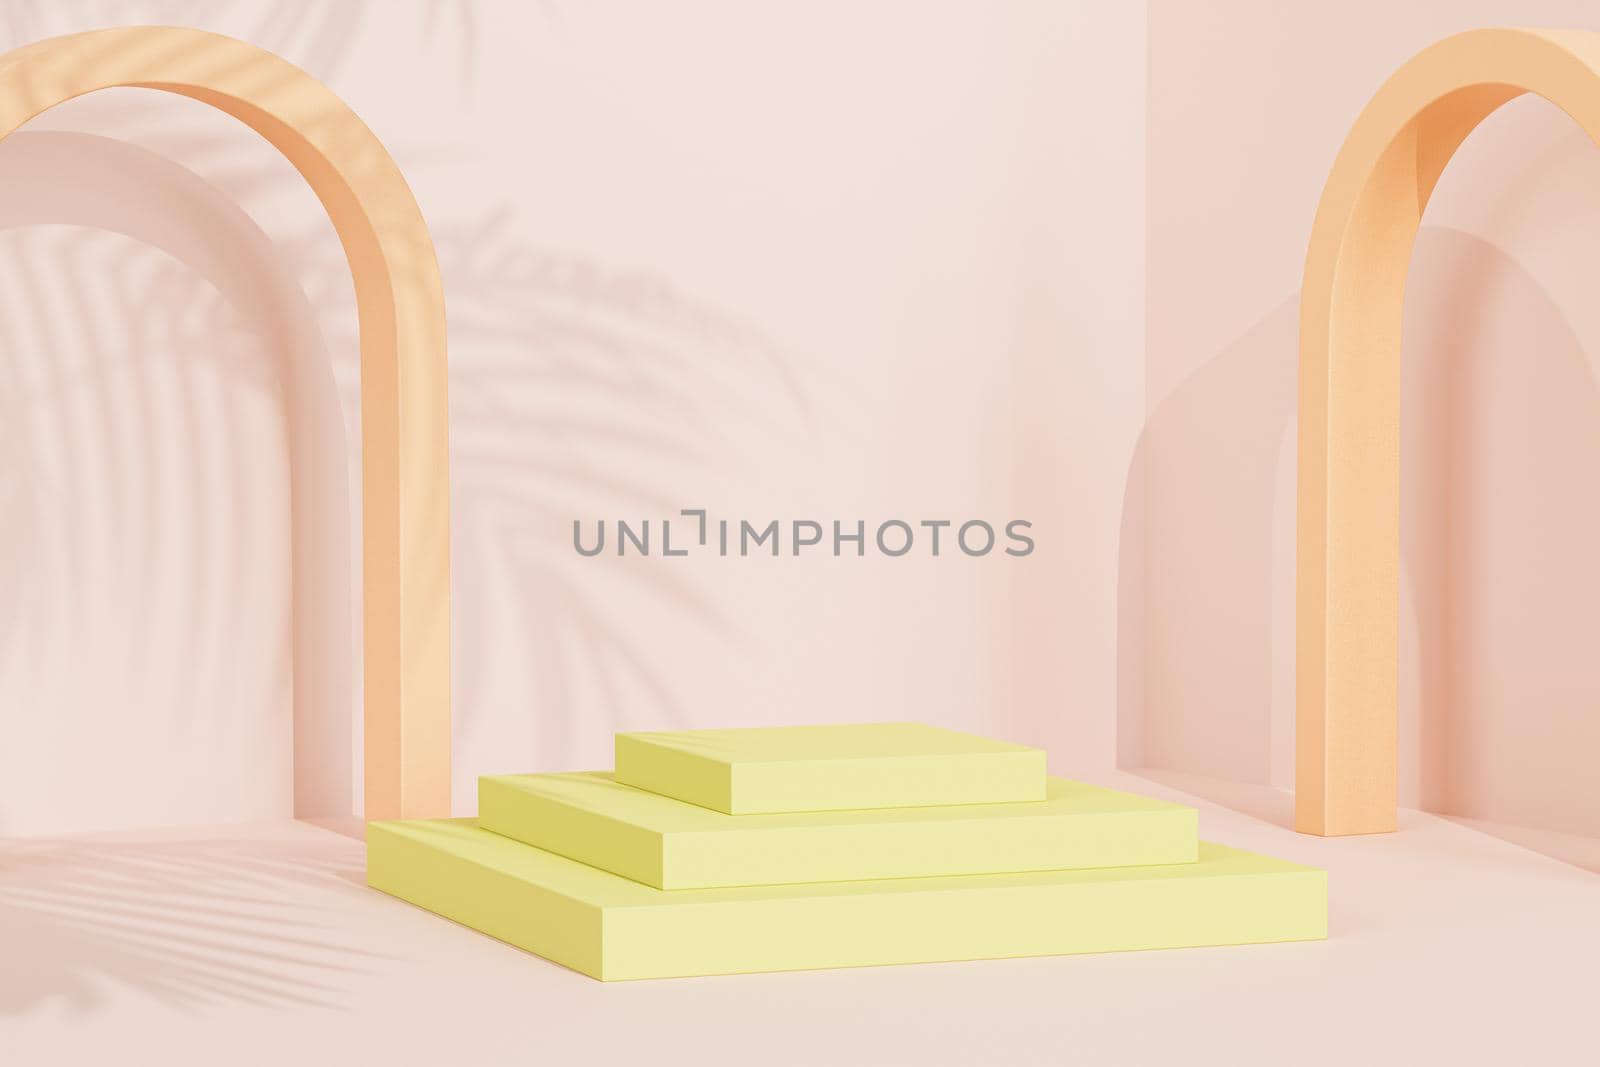 Podium or pedestal with arch for products or advertising on pastel beige background with tropical leaf shadow, 3d illustration render